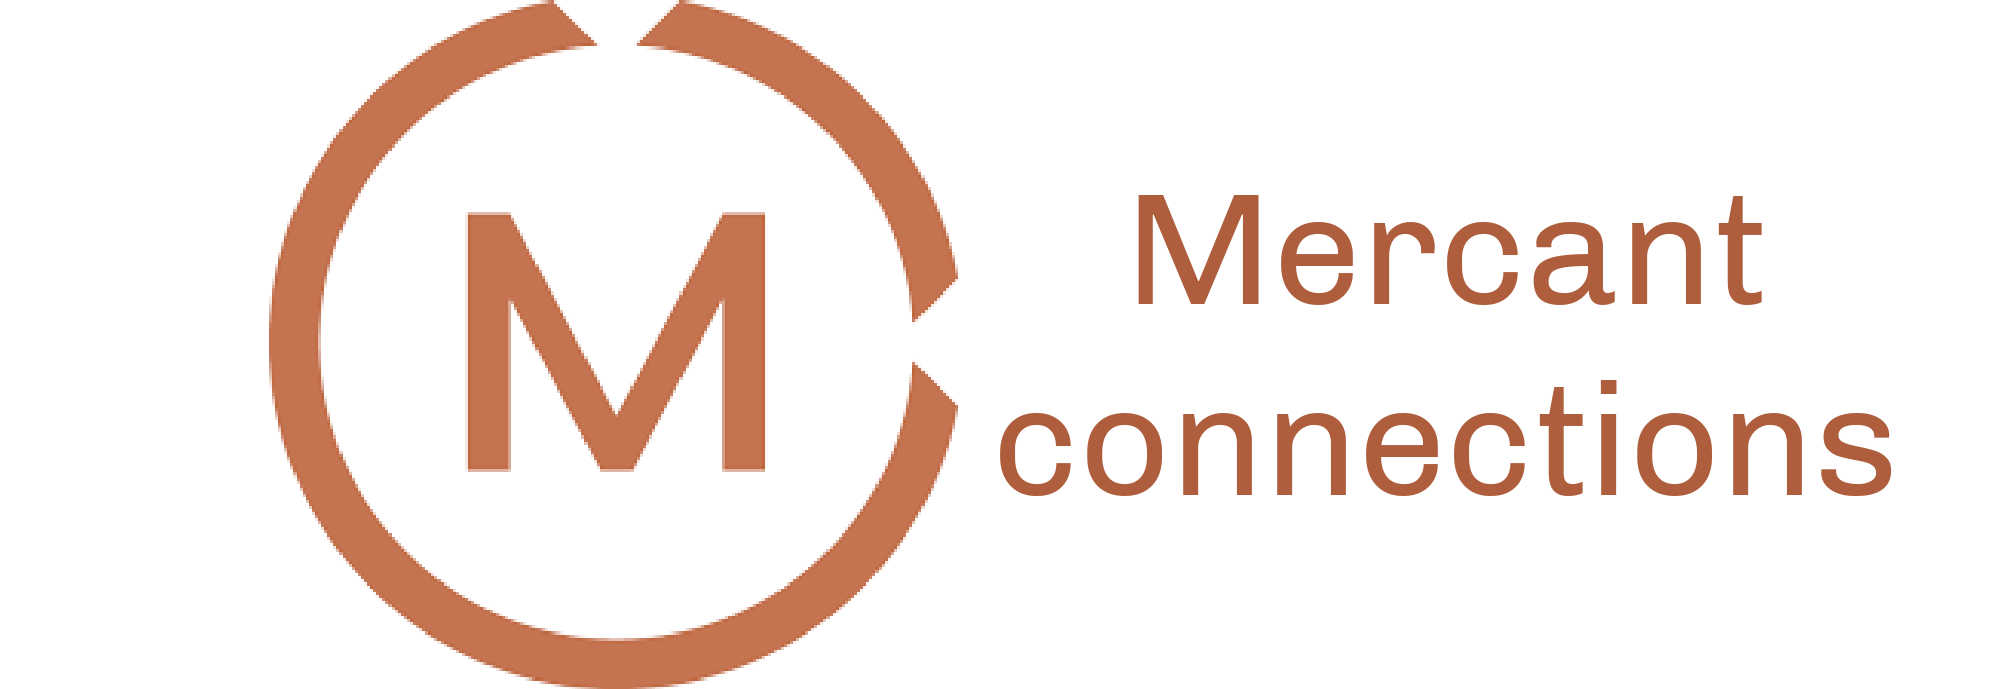 image of merchant connections logo